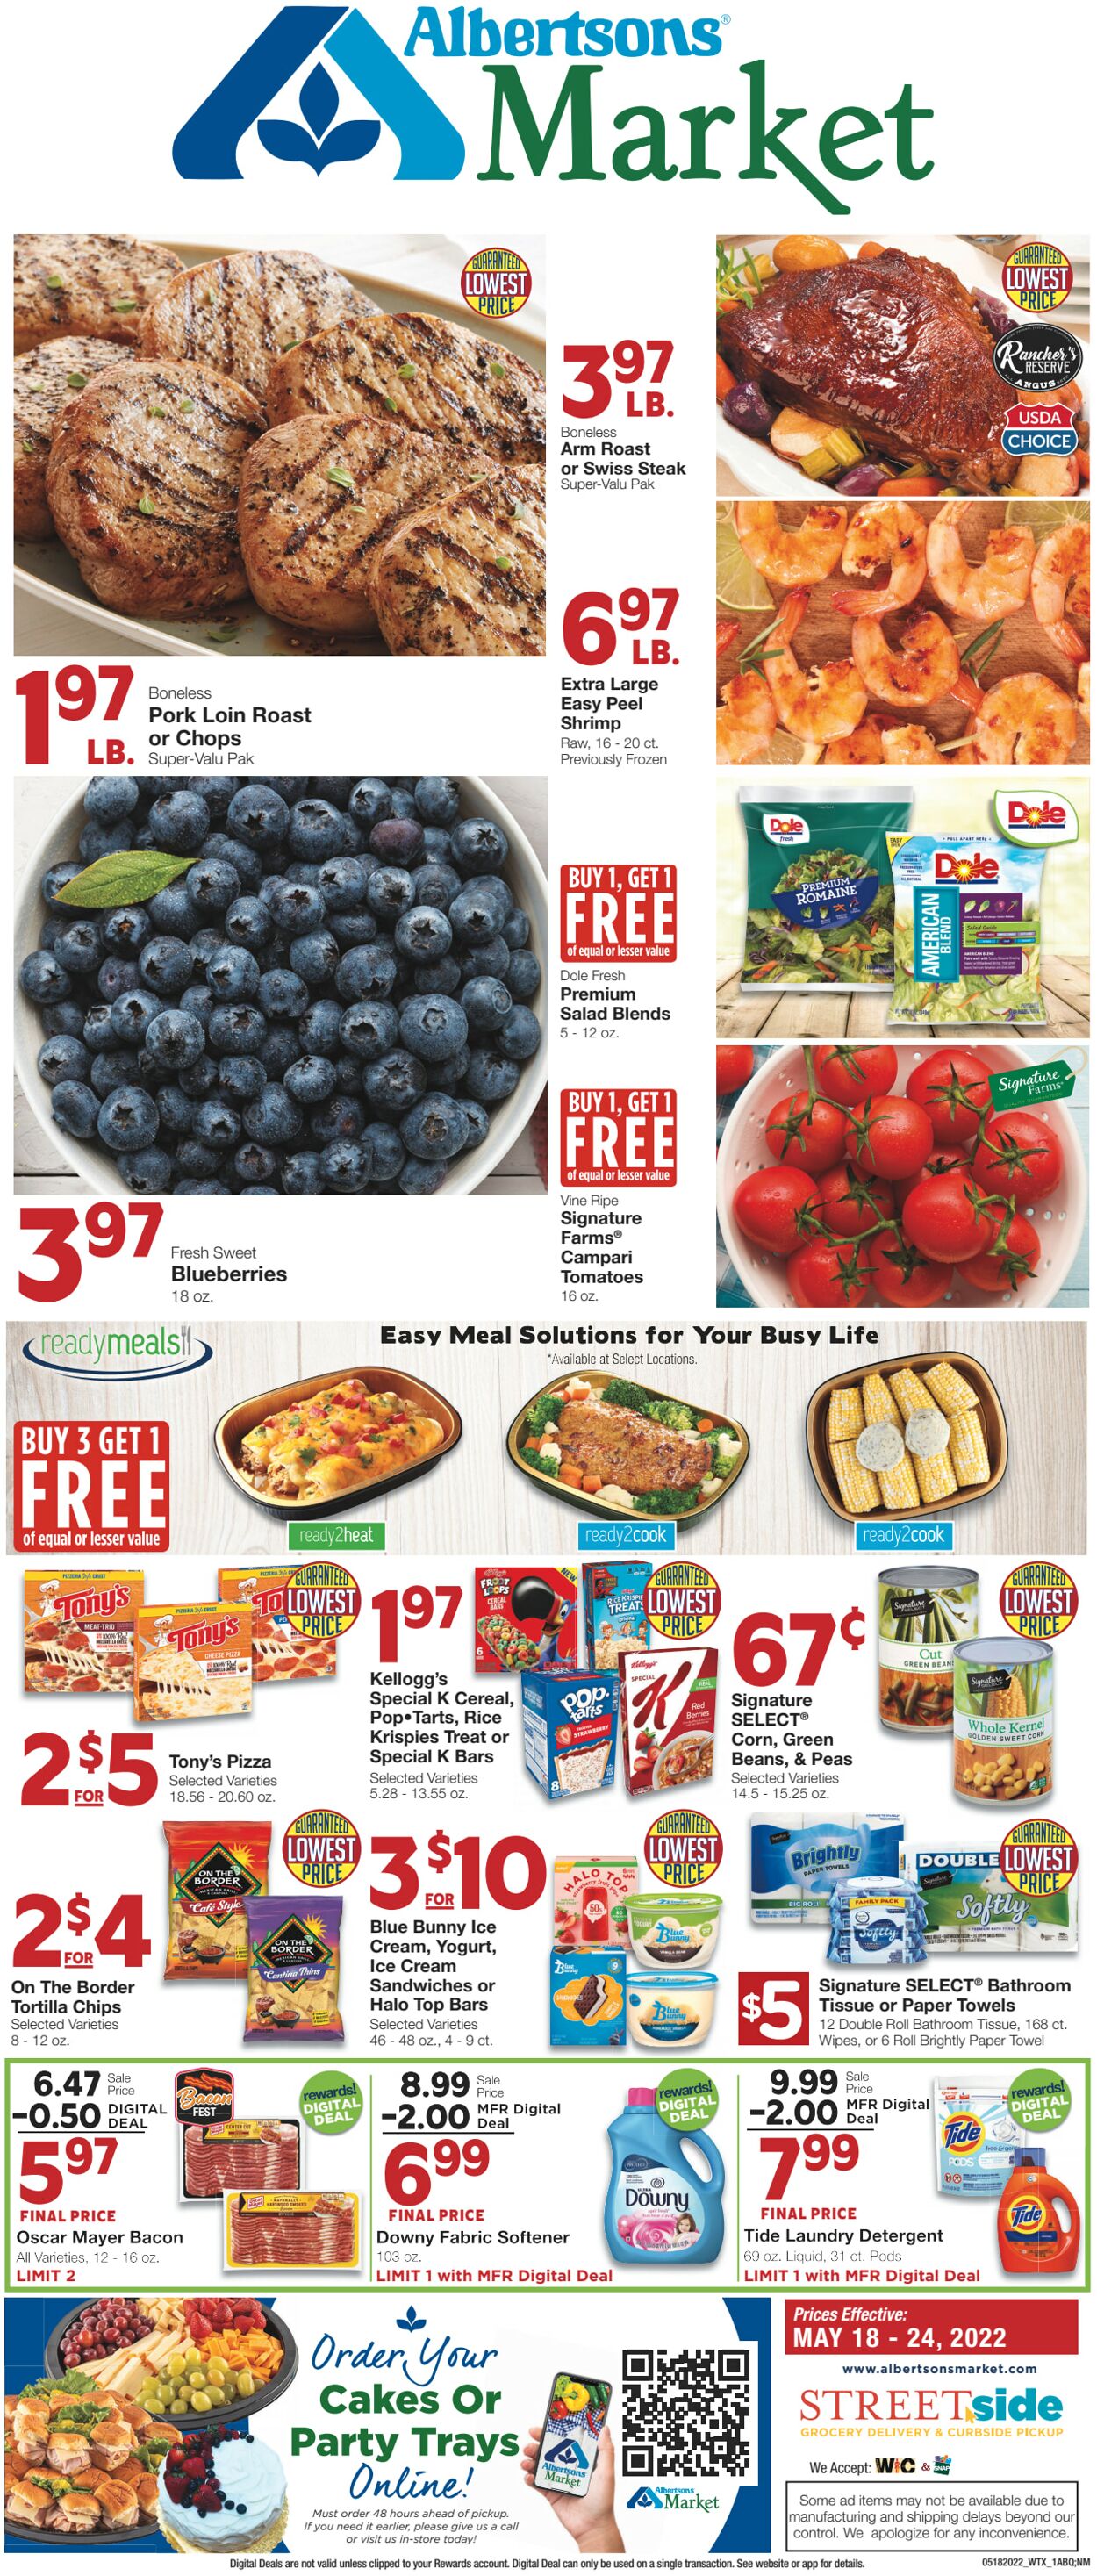 Albertsons Promotional weekly ads